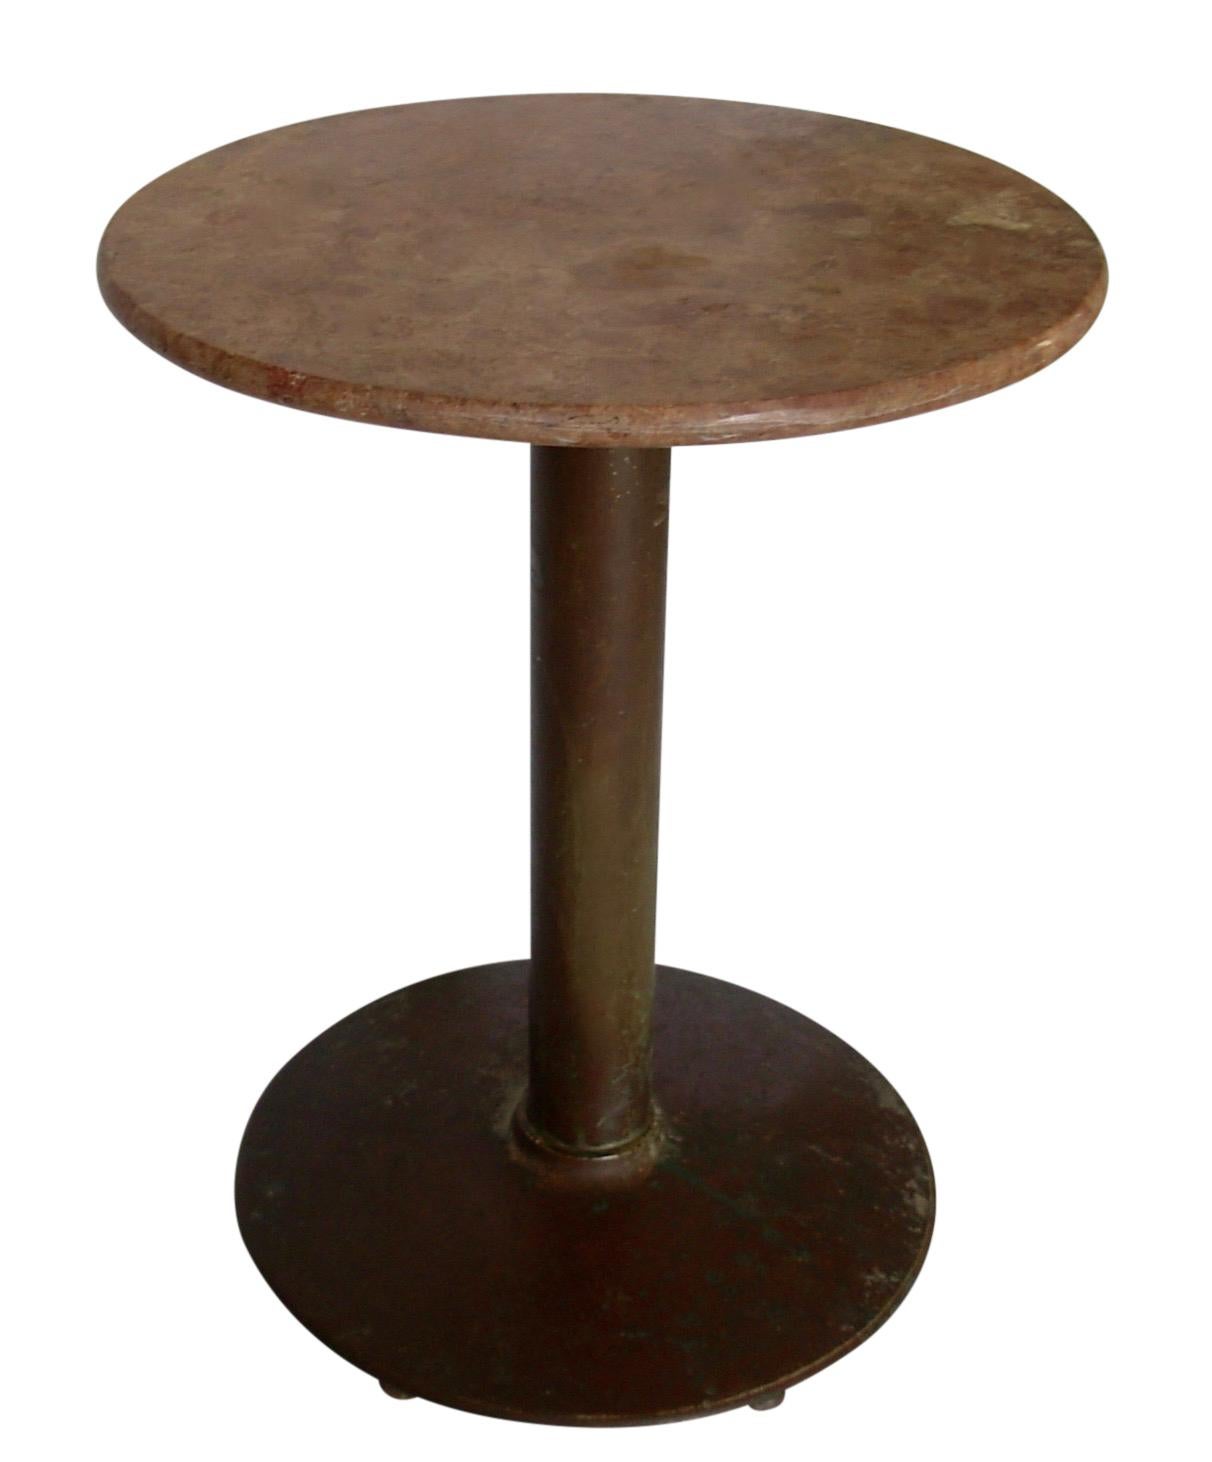 Antique marble top cafe table with a copper flashed steel base and rouge marble top.  French, Early to Mid 20th. Century.
